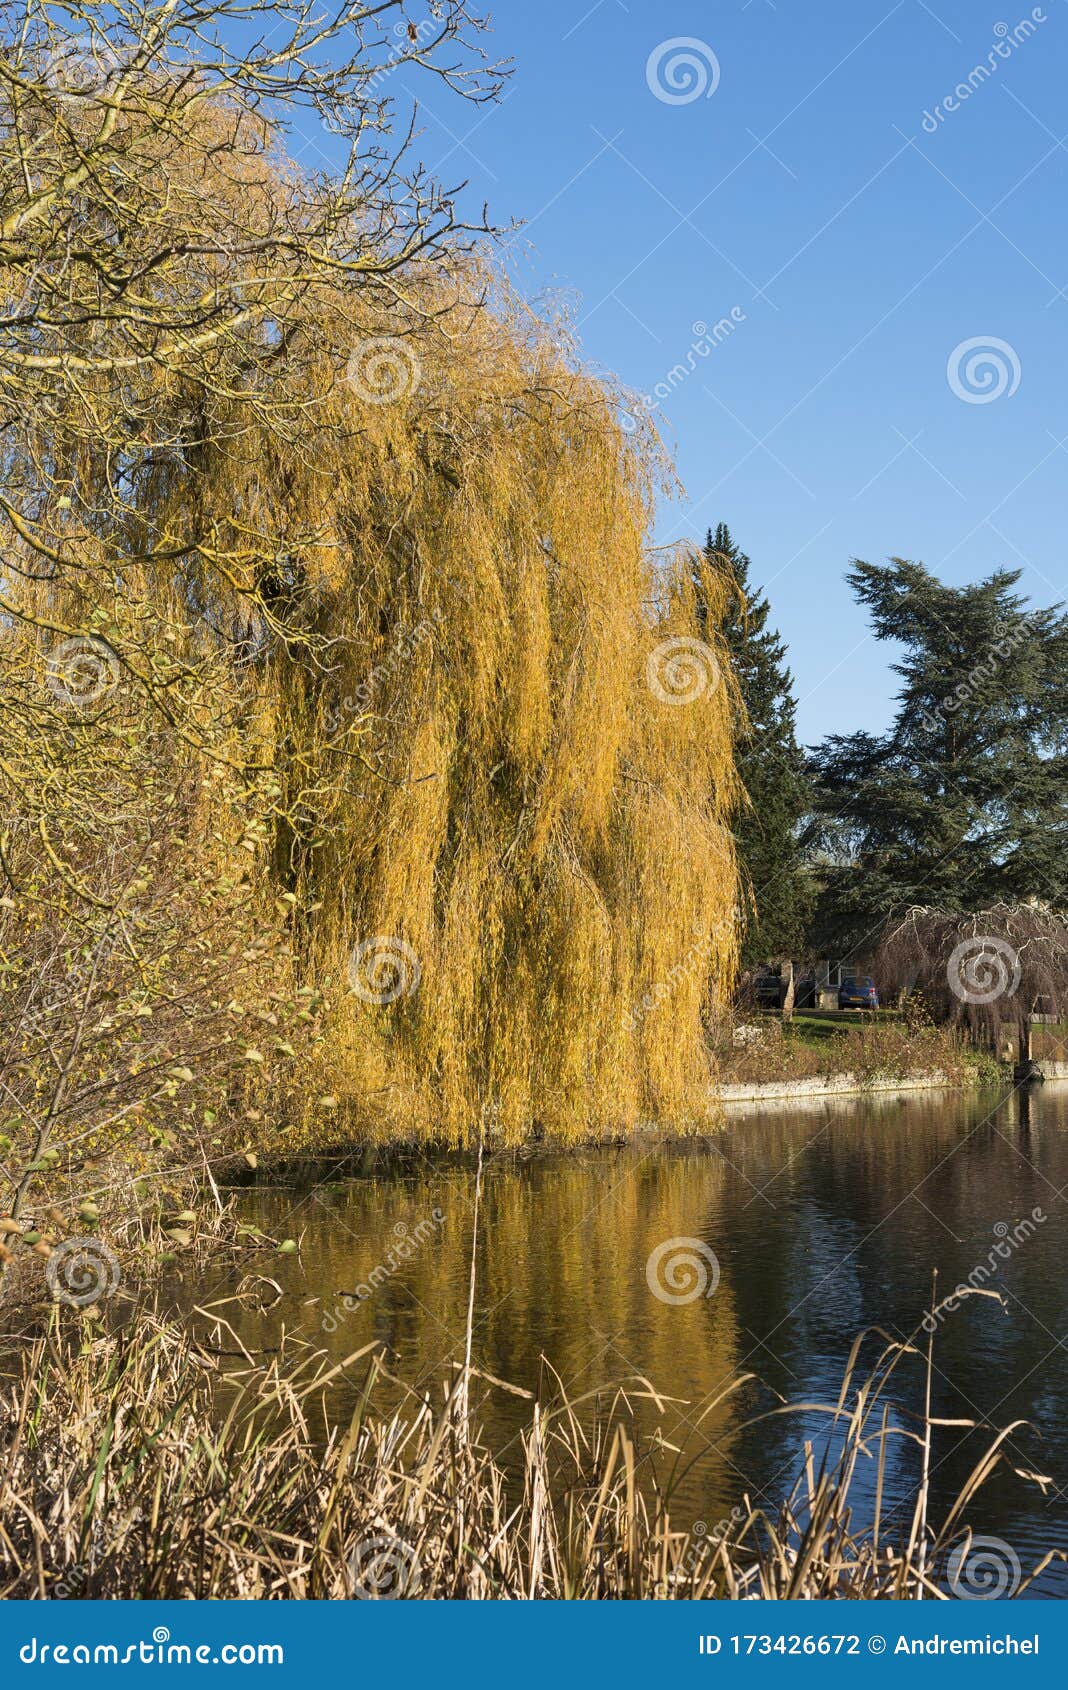 A Golden Weeping Willow Tree In Autumn Stock Photo Image Of England Scenic 173426672,Daisy Flower